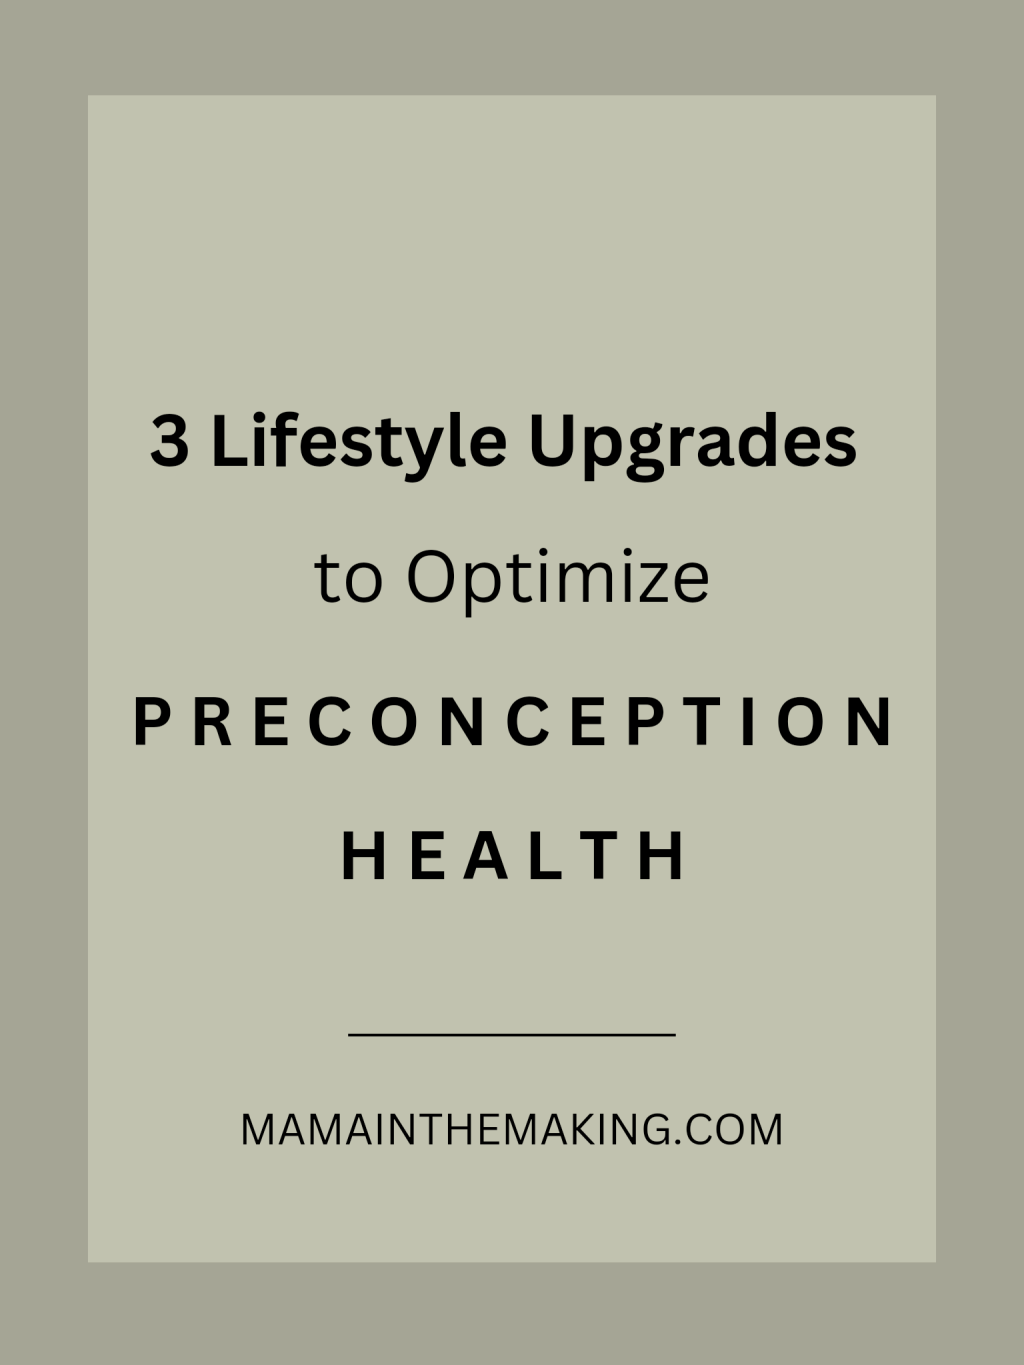 3 Lifestyle Upgrades to Optimize Your Preconception Health